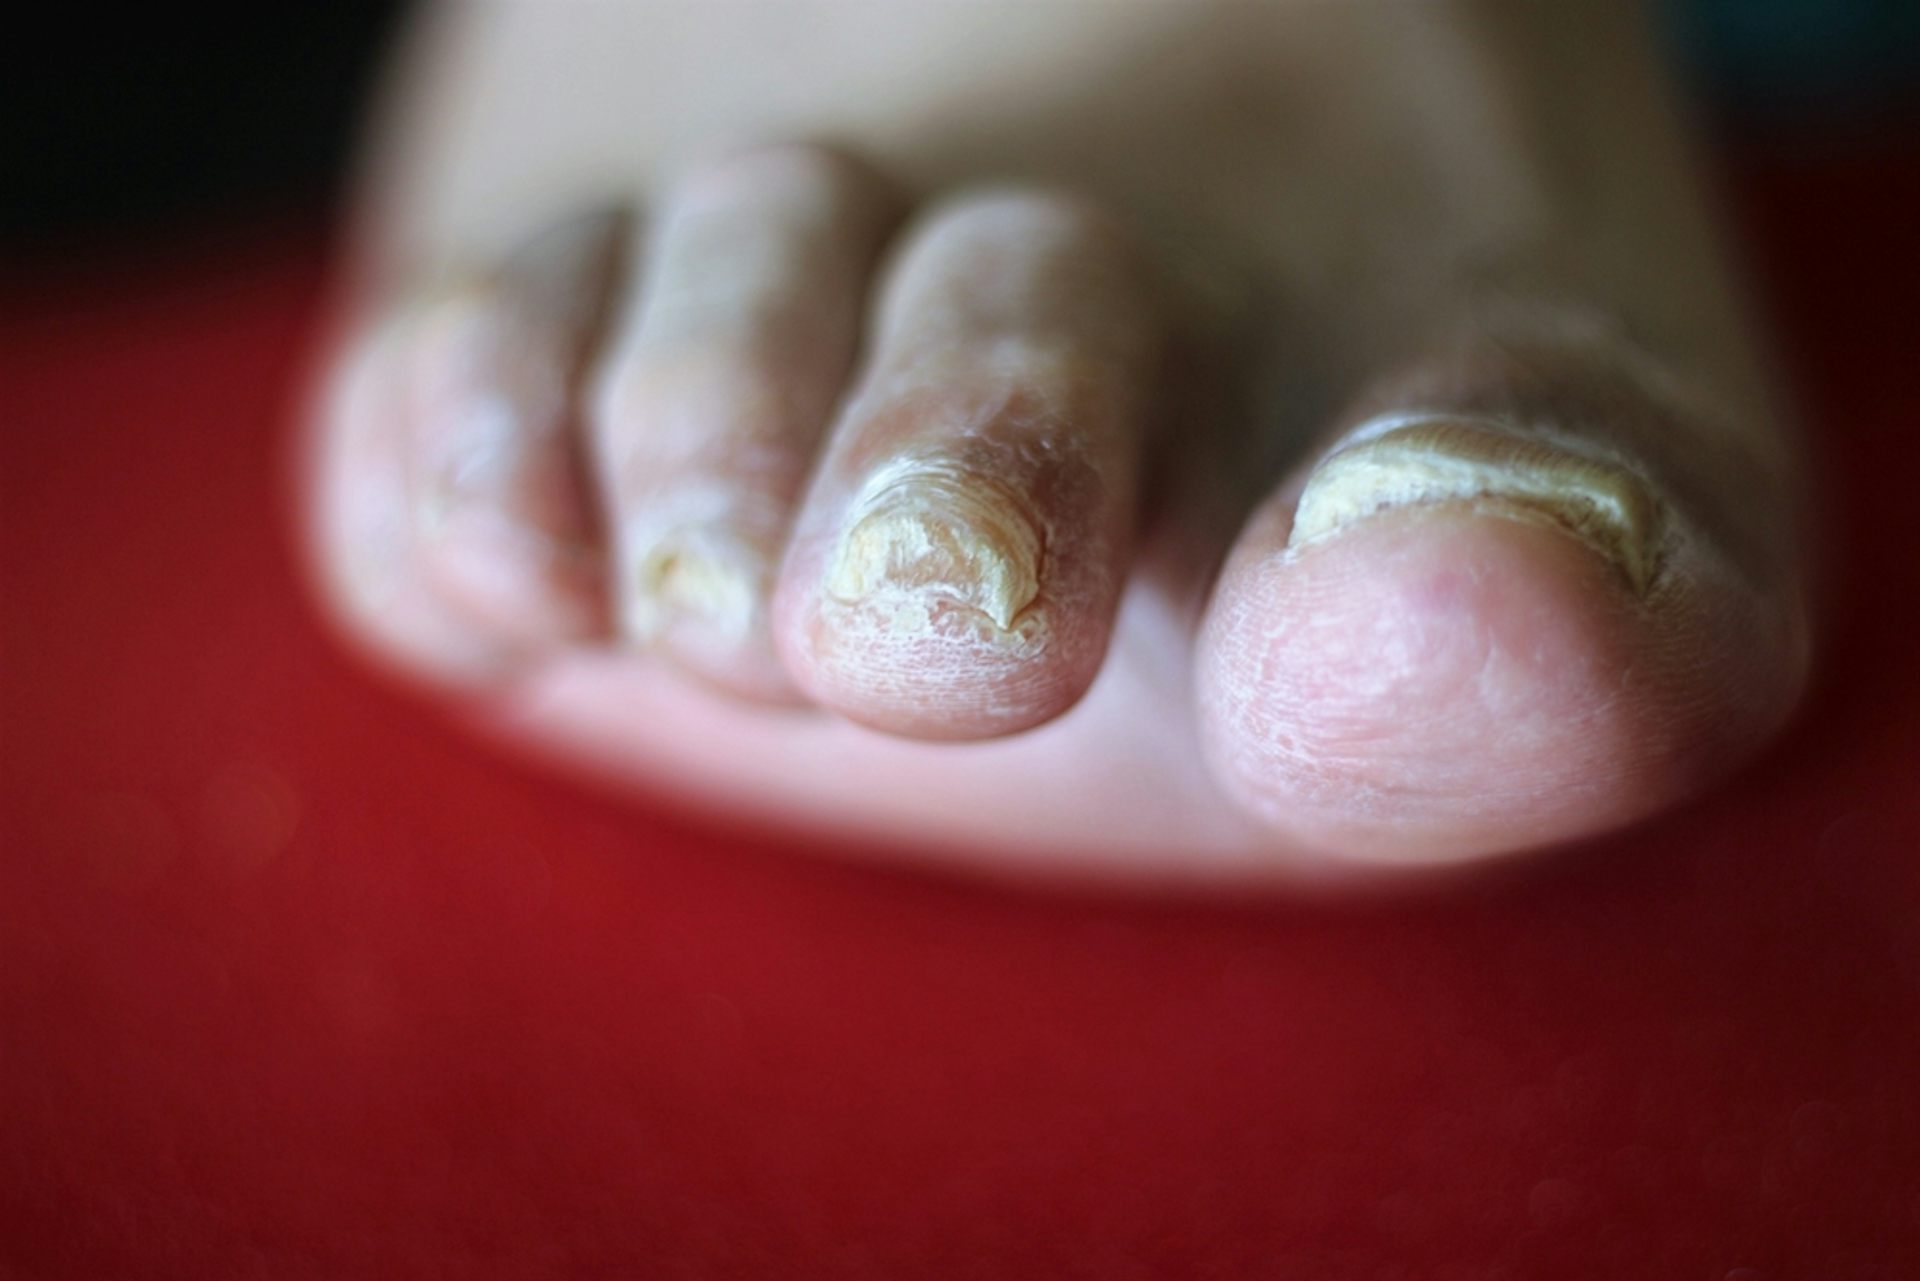 Clinical Trial Designs for Topical Antifungal Treatments of Onychomycosis  and Implications on Clinical Practice | MDedge Dermatology